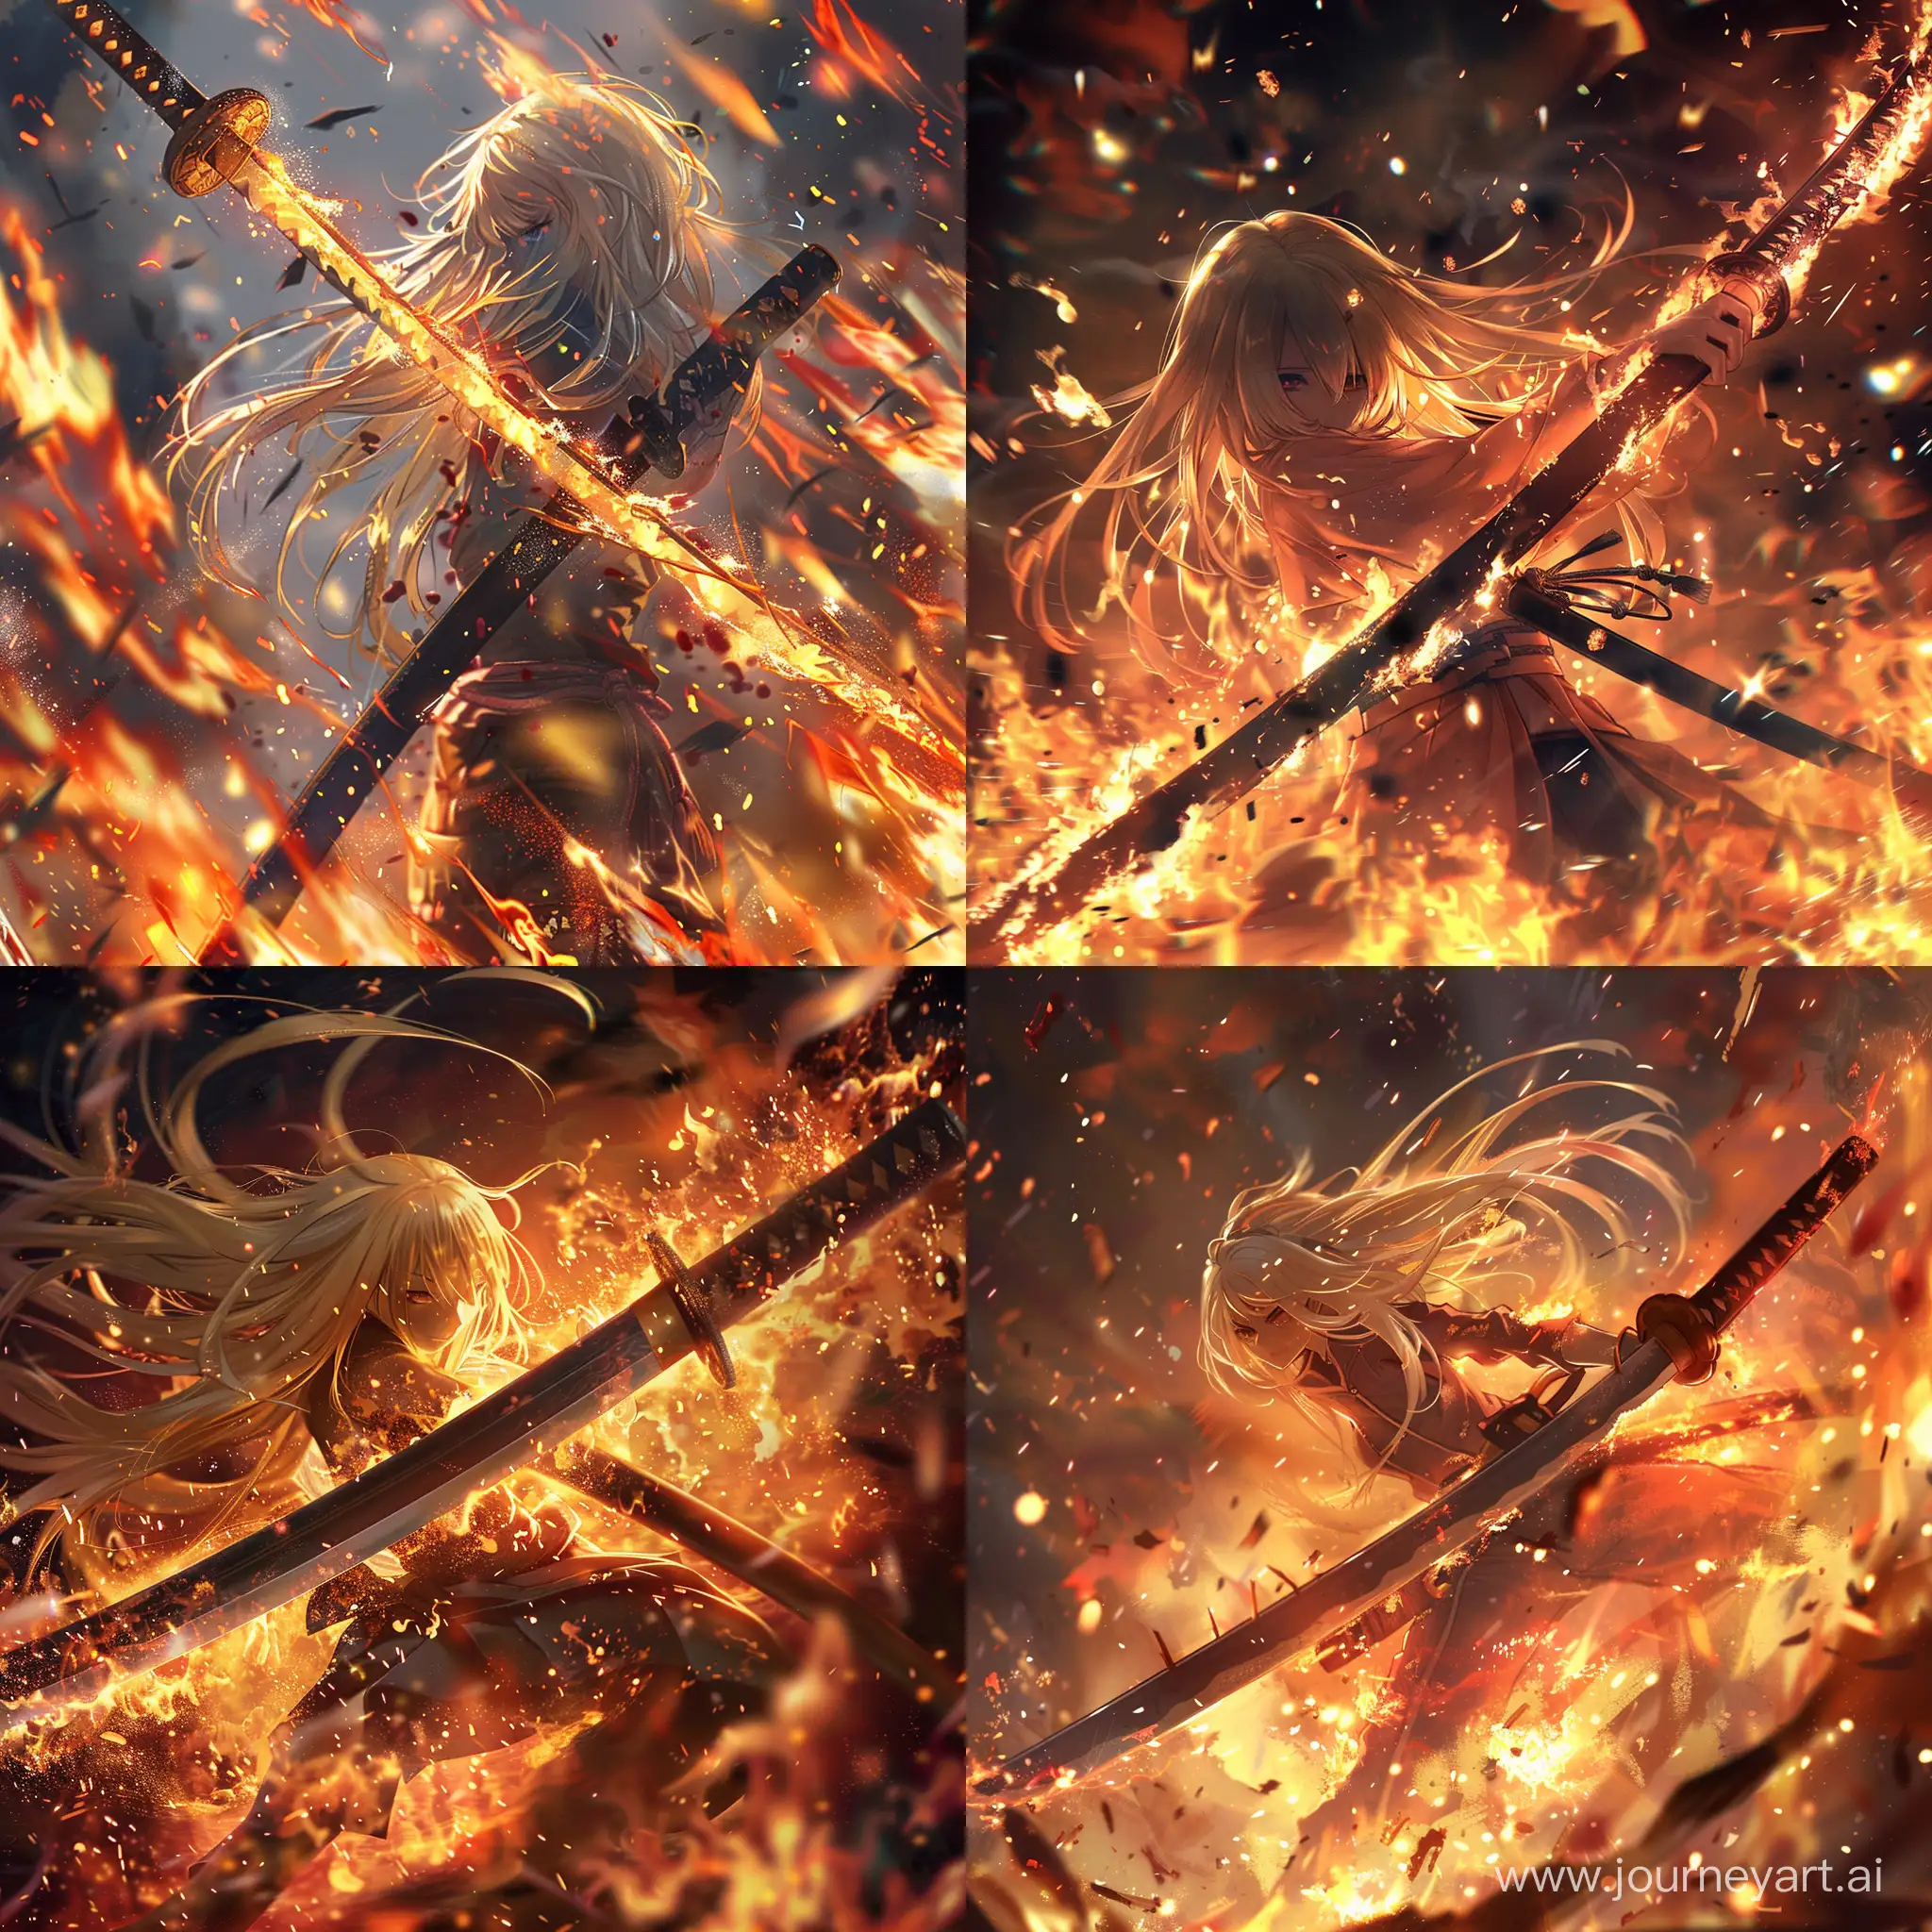 The image of a katana (Japanese weapon) in the embrace of flames, sparks. Katana is in the foreground, in the middle, held by a girl with blonde hair. There is fire behind and on the sides. Detailed, use for an avatar. Definitely in the anime style